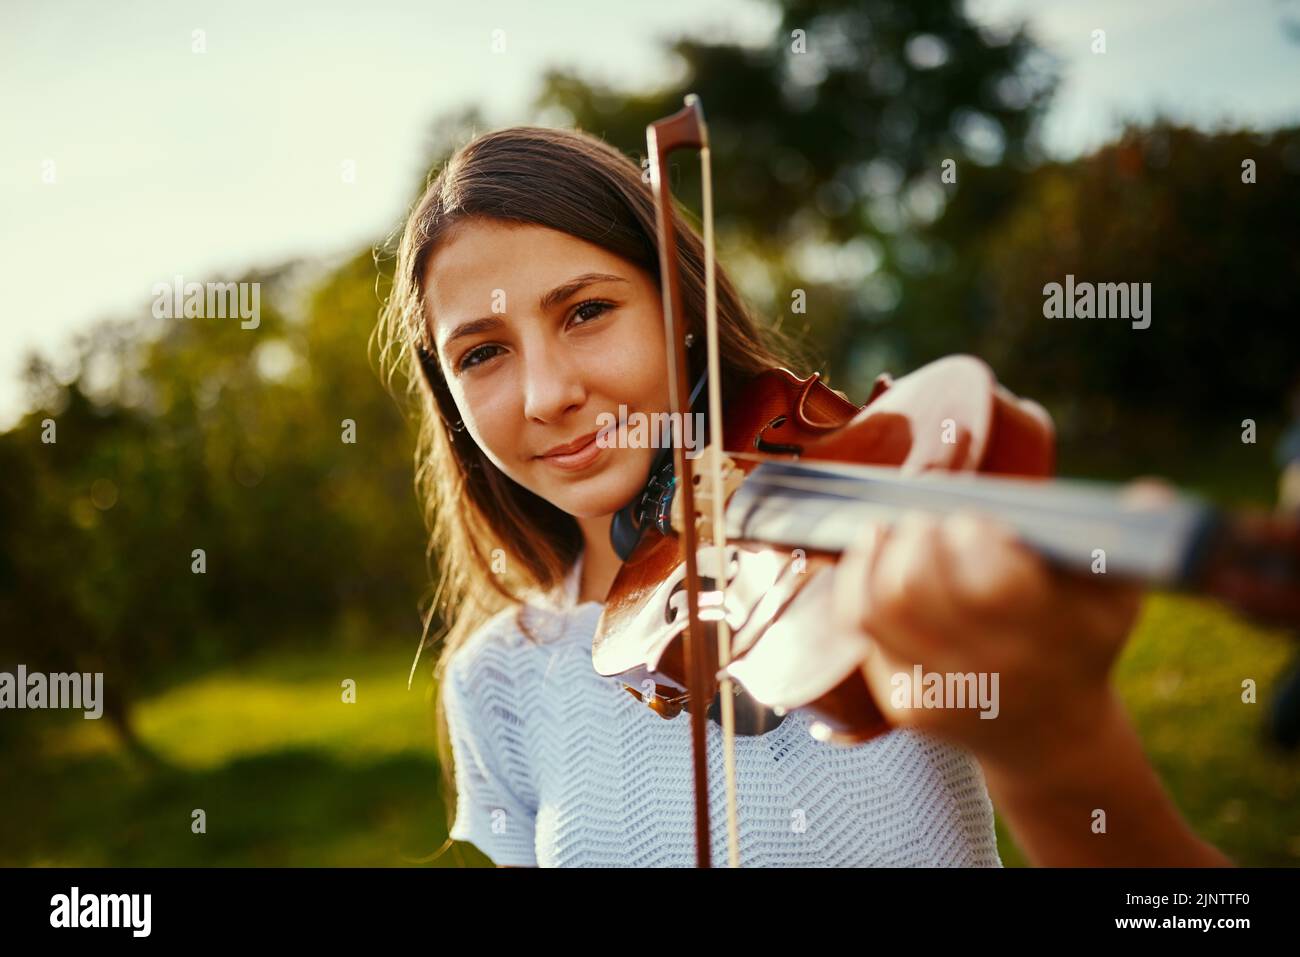 She found her passion at a young age. a young girl playing a violin outdoors. Stock Photo